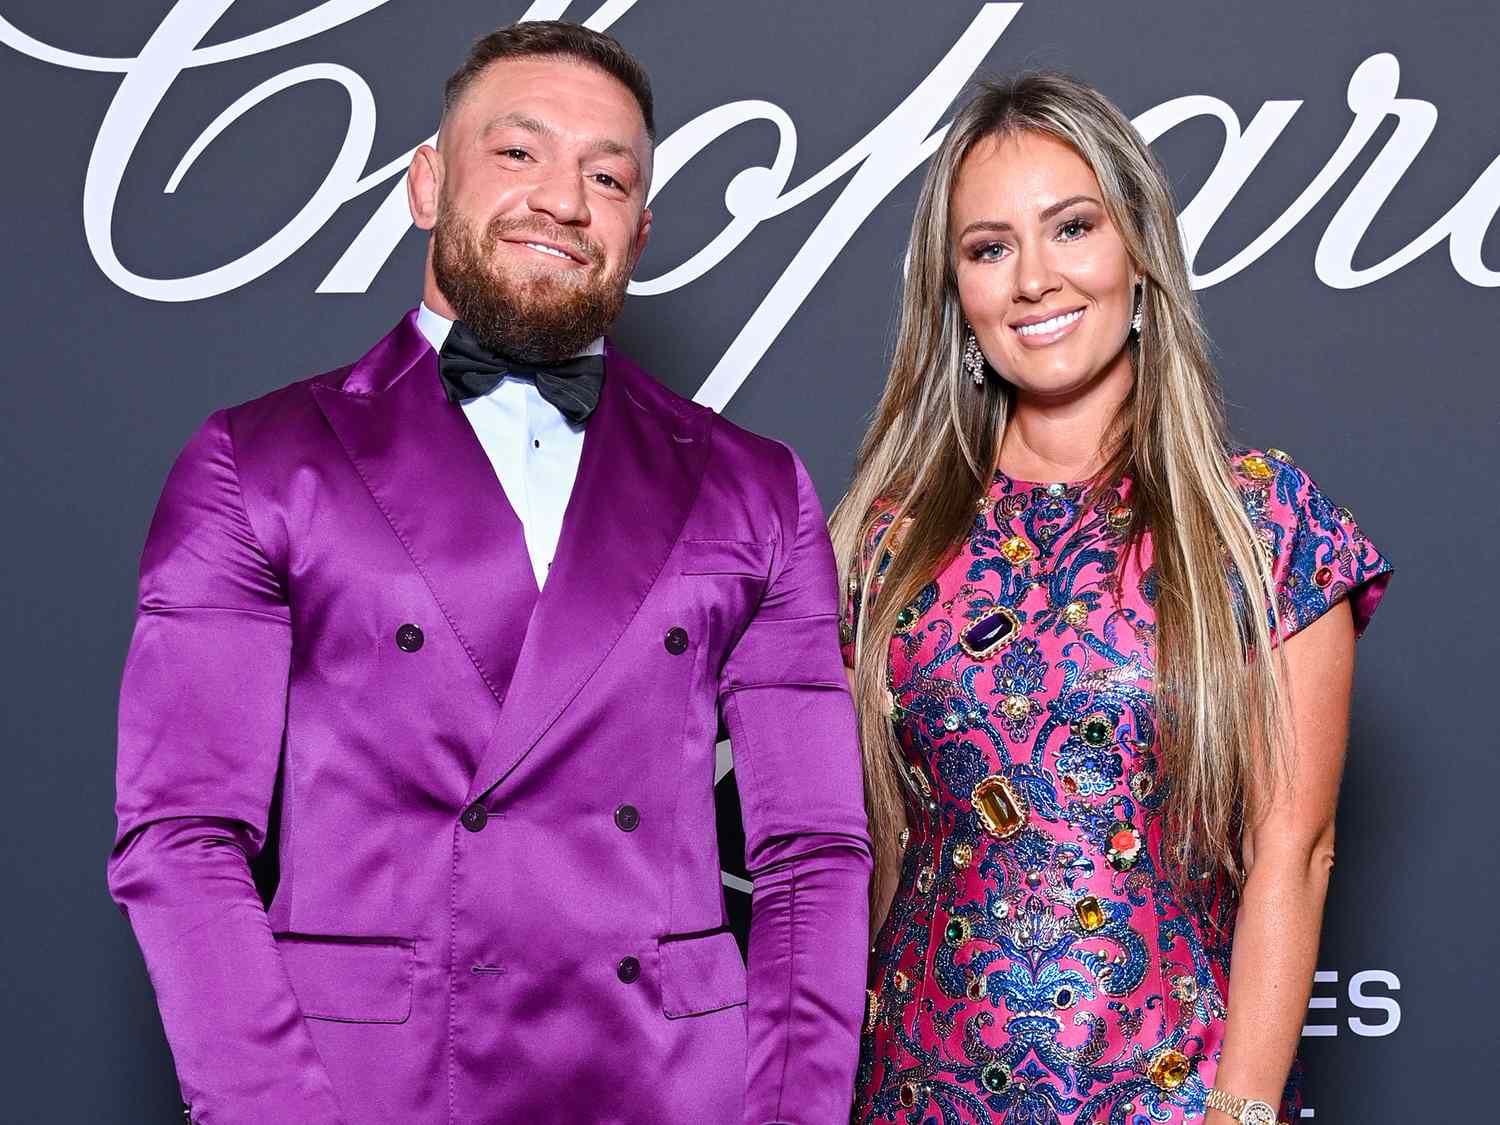 conor-mcgregor-and-dee-devlin-welcome-their-fourth-child-a-baby-boy